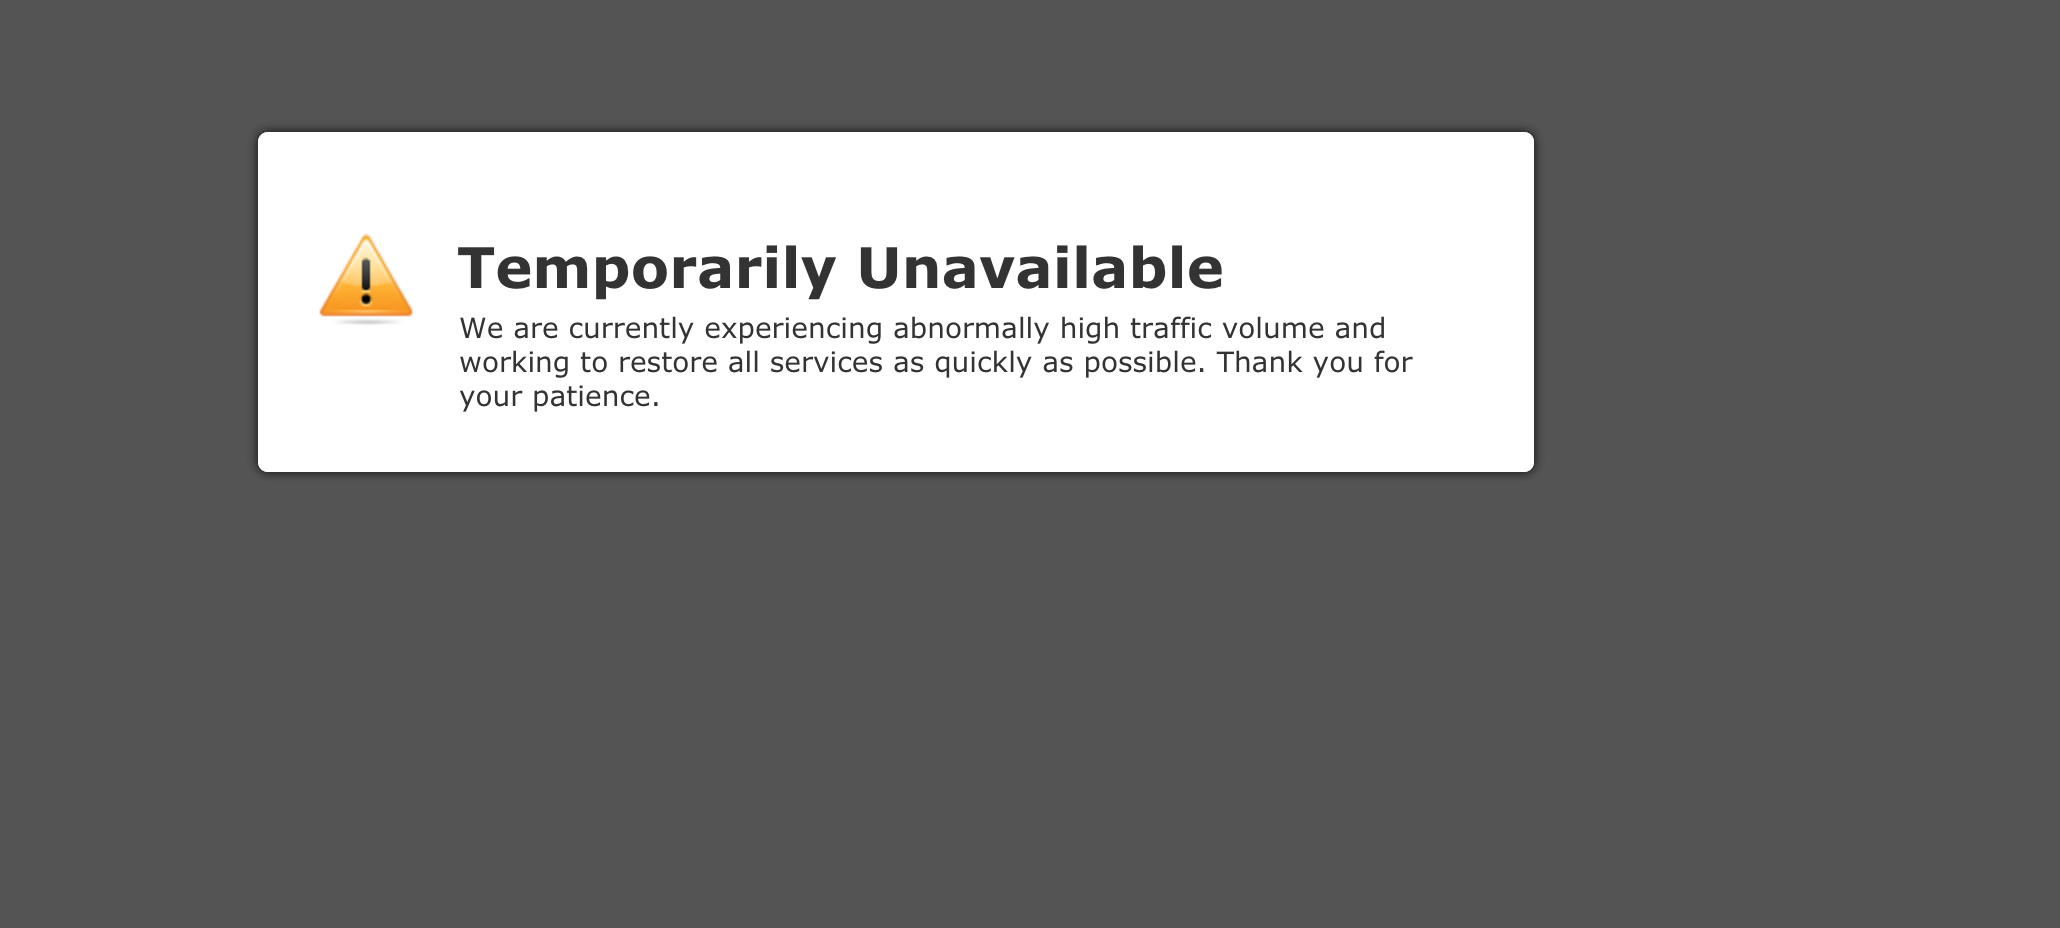 101] This website is temporarily unavailable